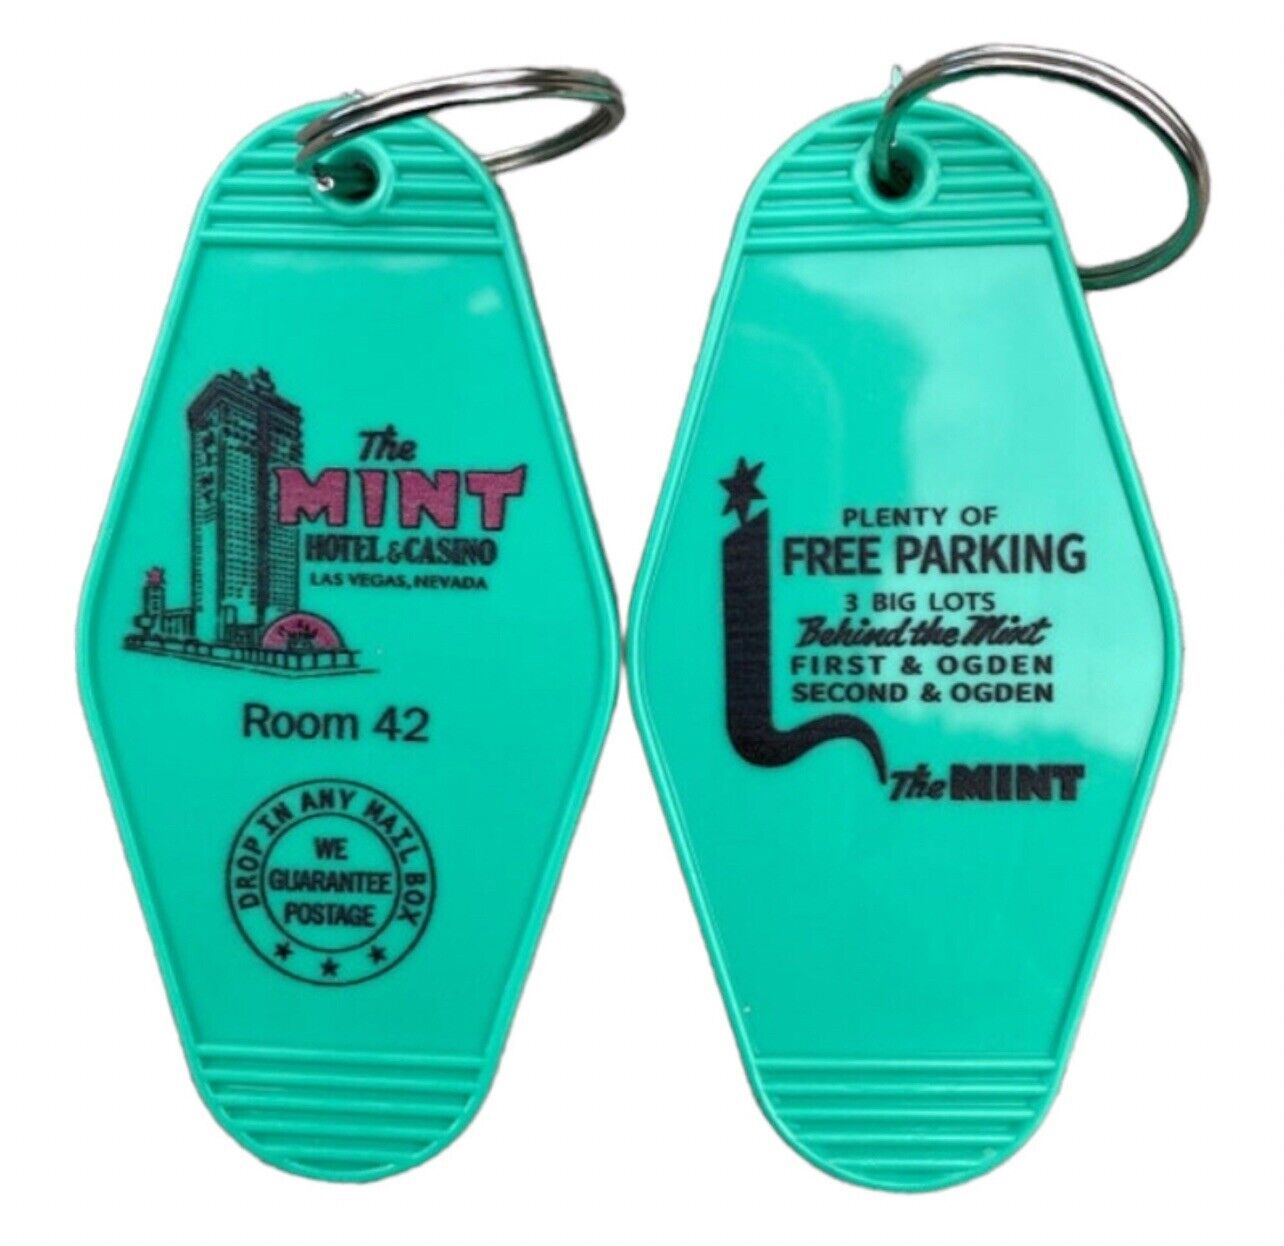 THE MINT ‘Old Las Vegas’ inspired keychain